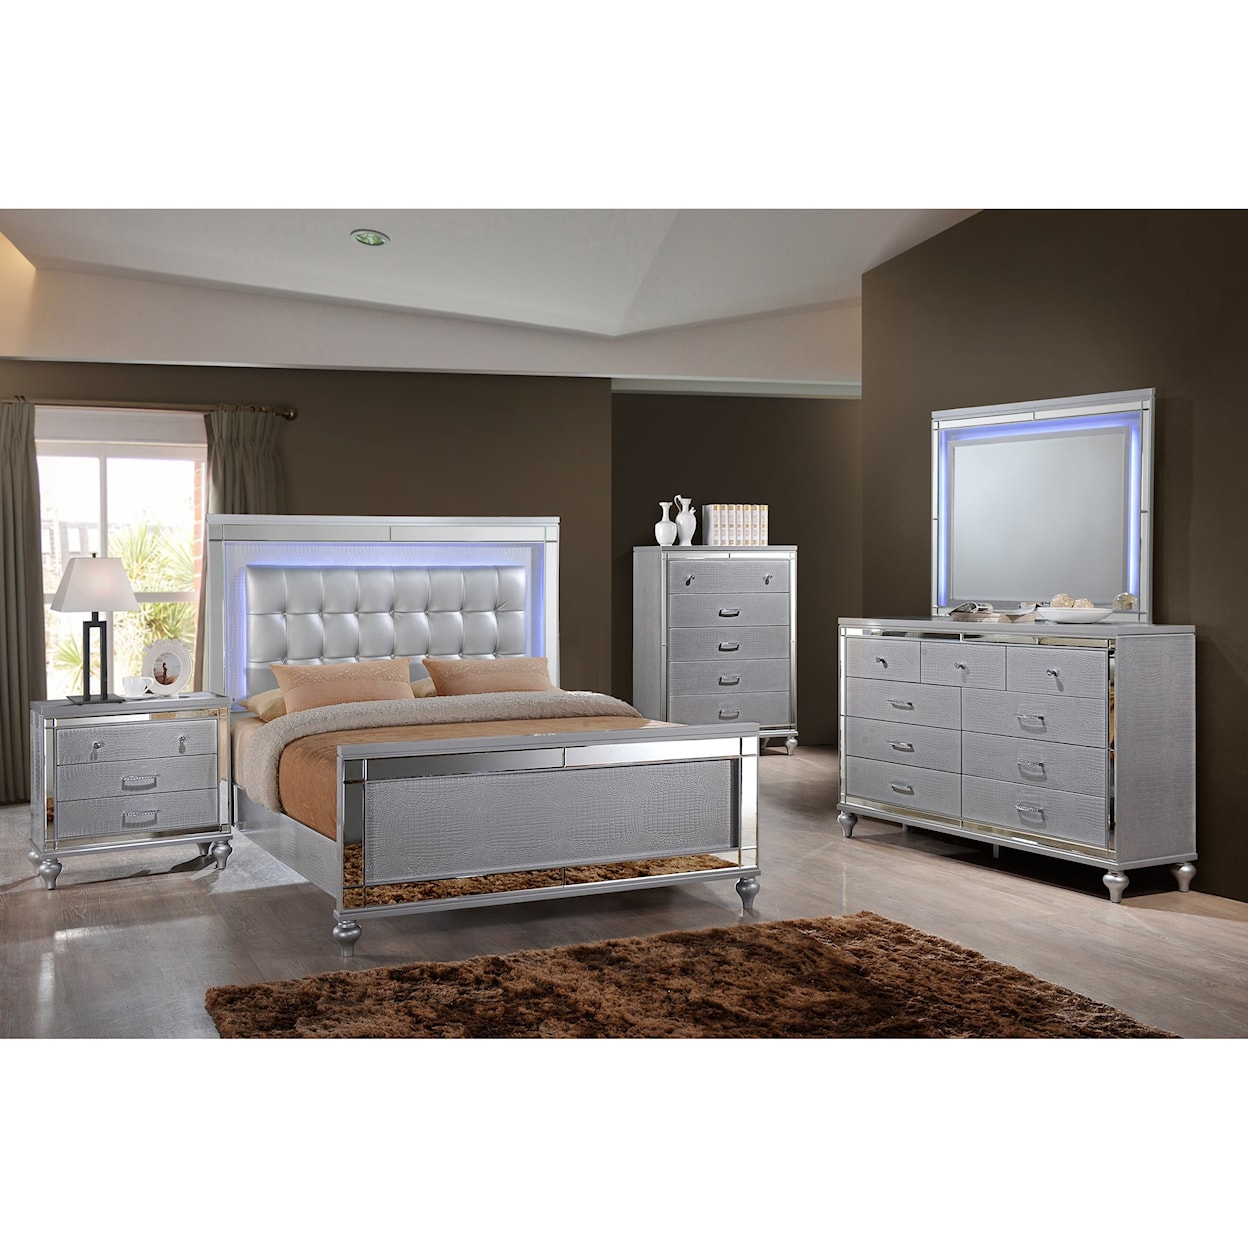 New Classic Furniture Valerie Twin Bedroom Group